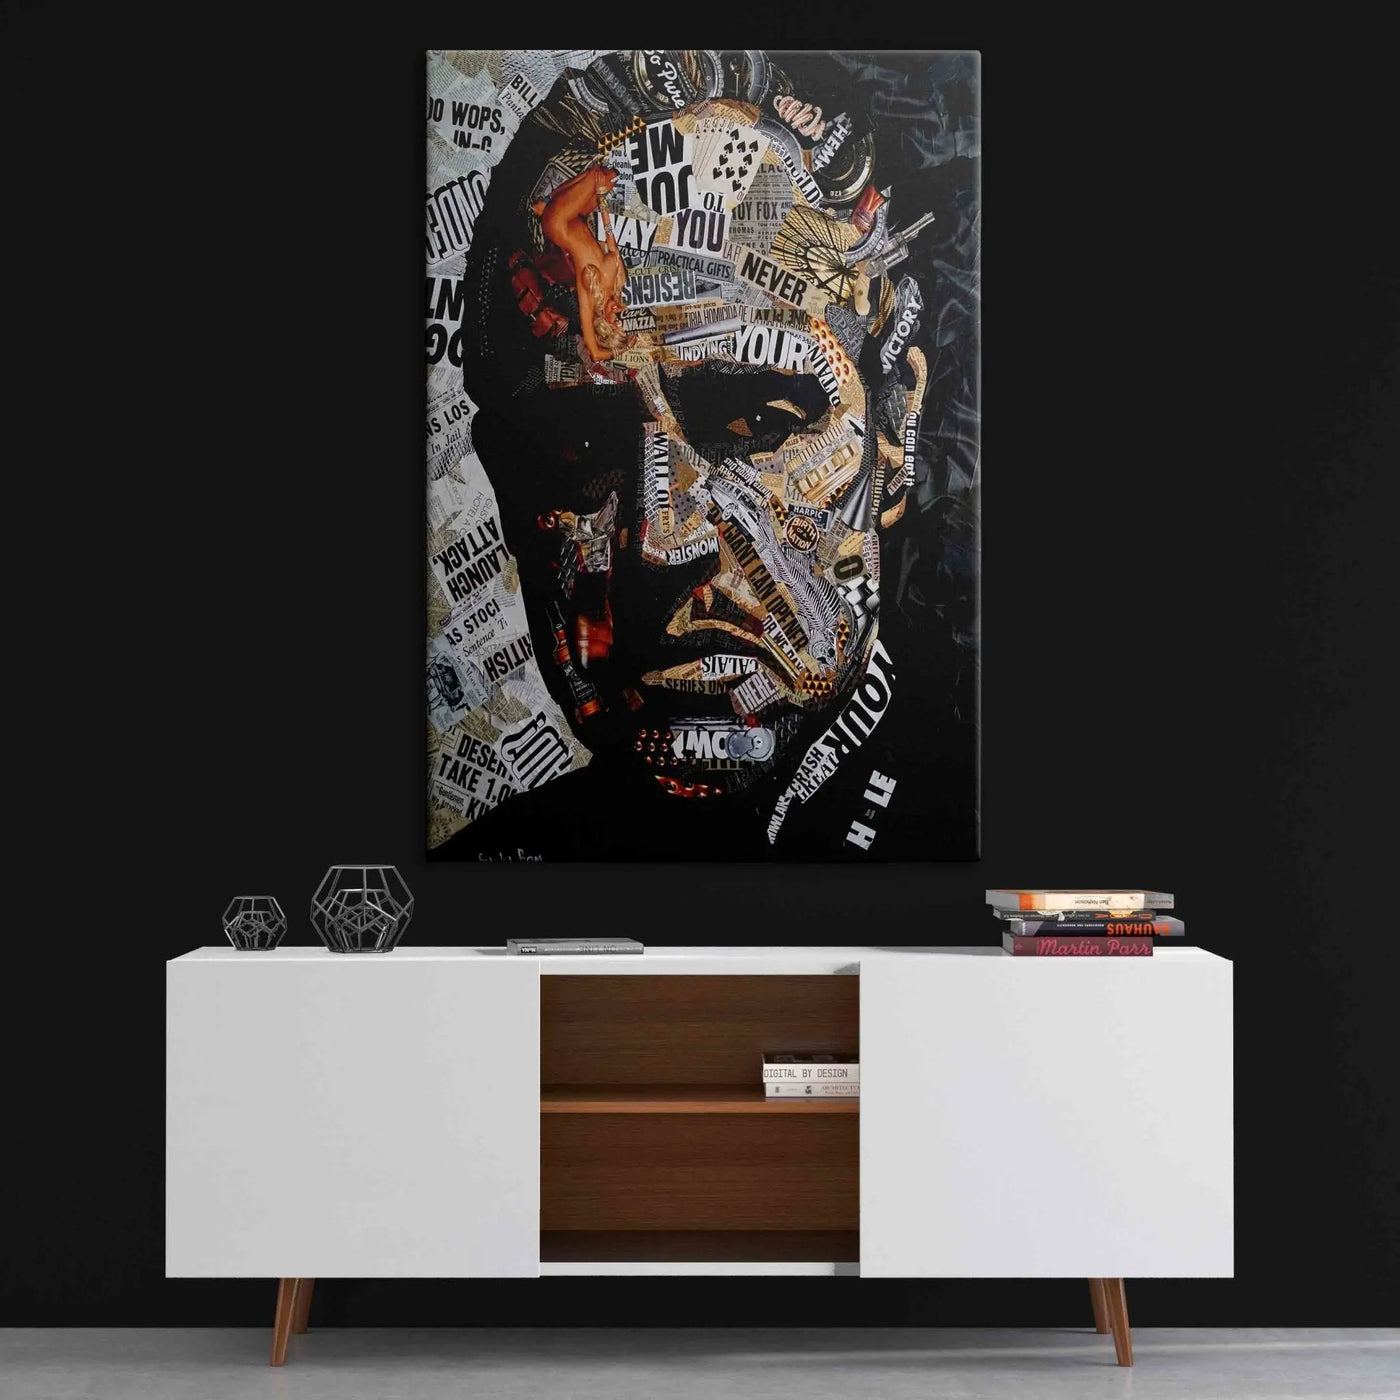 "THE GODFATHER" - Art For Everyone